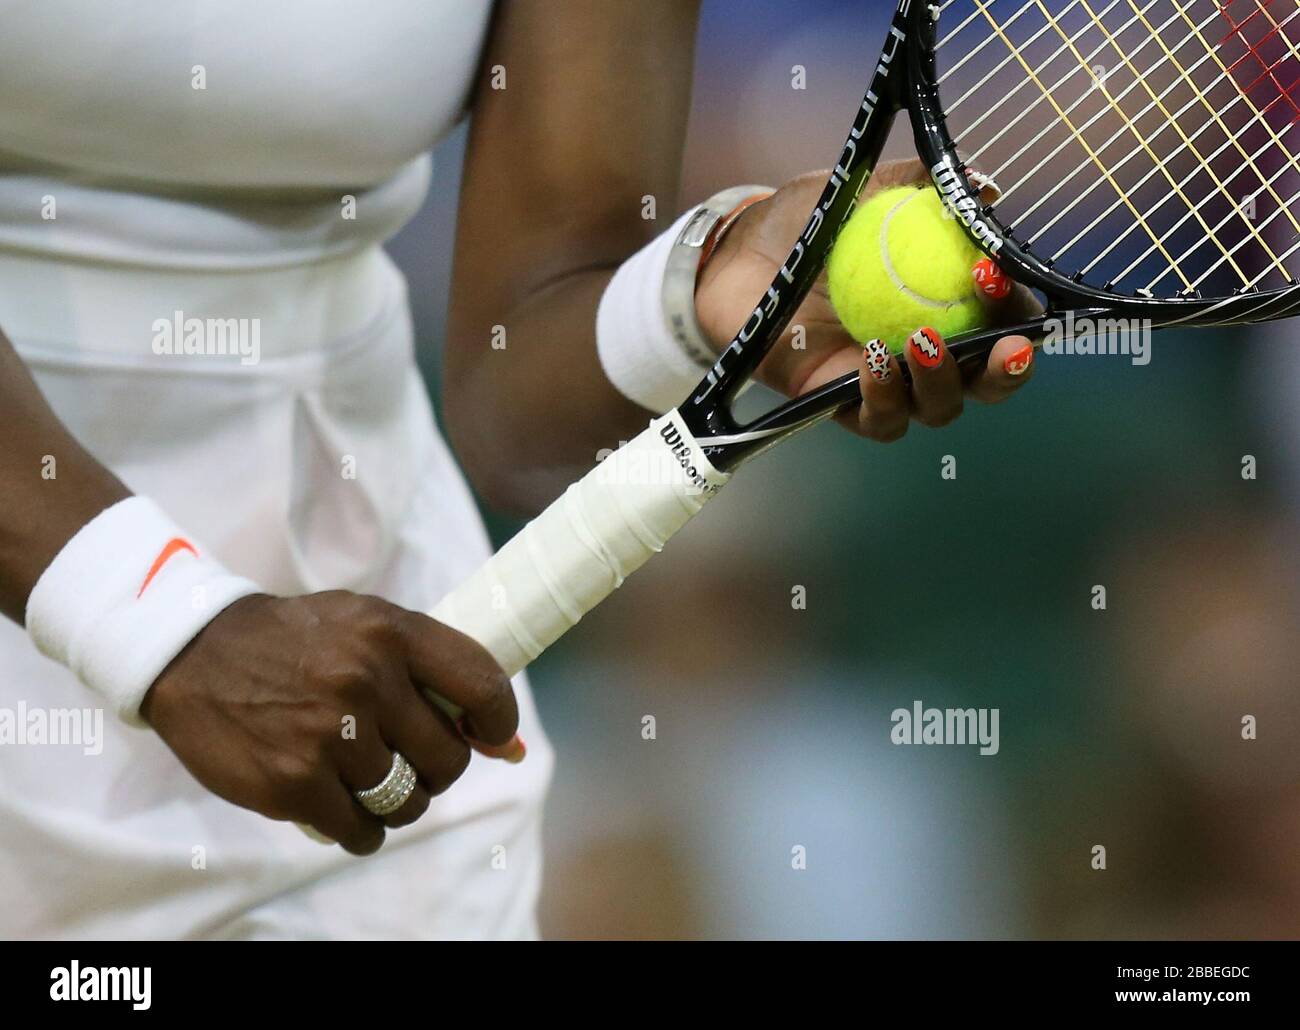 Anyone else impressed that Coco plays with (very) long nails? : r/tennis